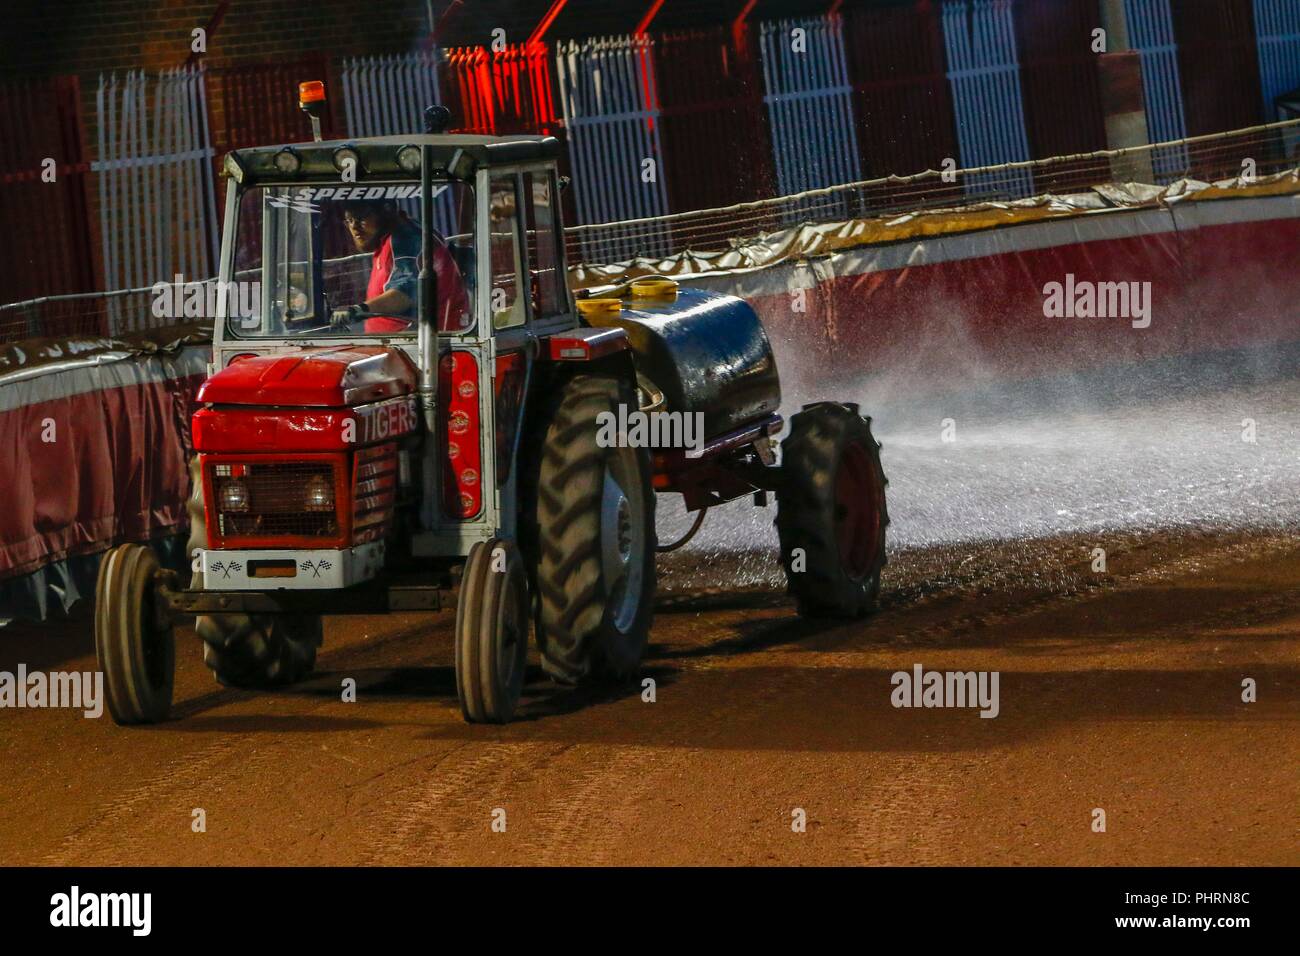 Damping down, staff work on the Ashfield track during the intival at the SGB National Championship meeting between Glasgow Tigers & Newcastle Diamonds Stock Photo